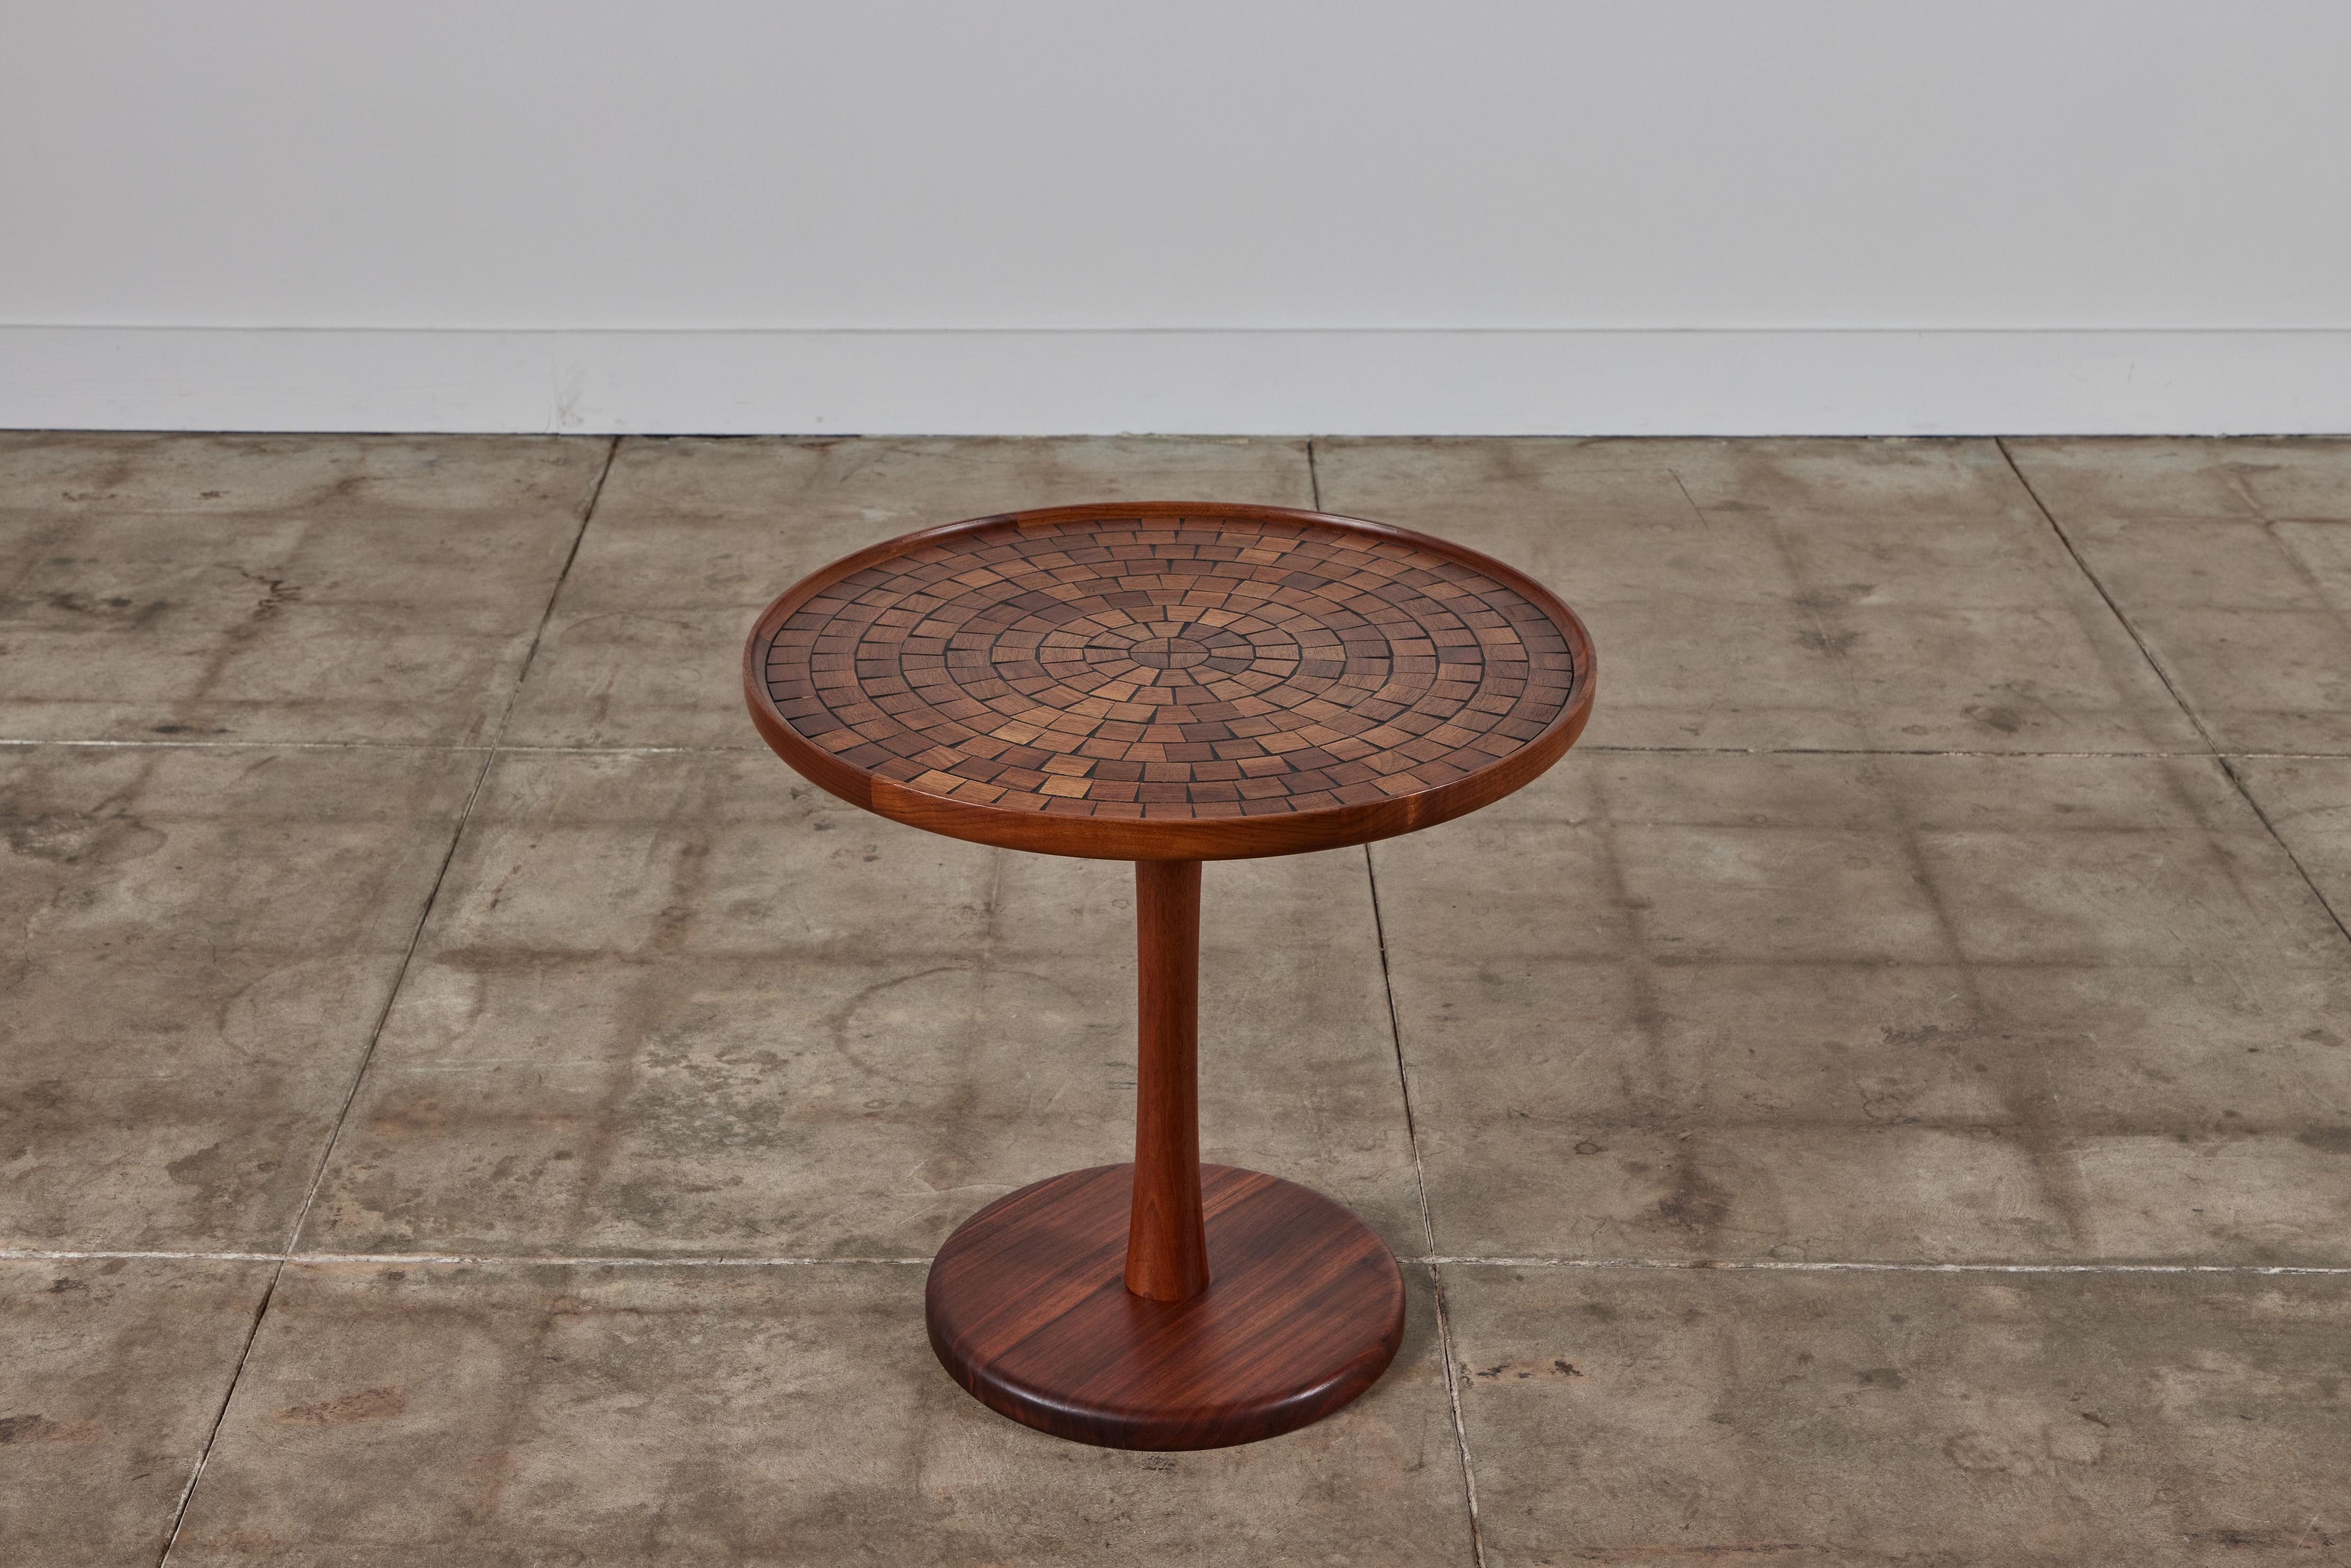 Round oak side table by Gordon & Jane Martz. The table top is inlaid with square and triangular oak tiles in a geometric pattern. The tiles feature varying wood grains and brown tones . The frame, base and pedestal of the table are all solid